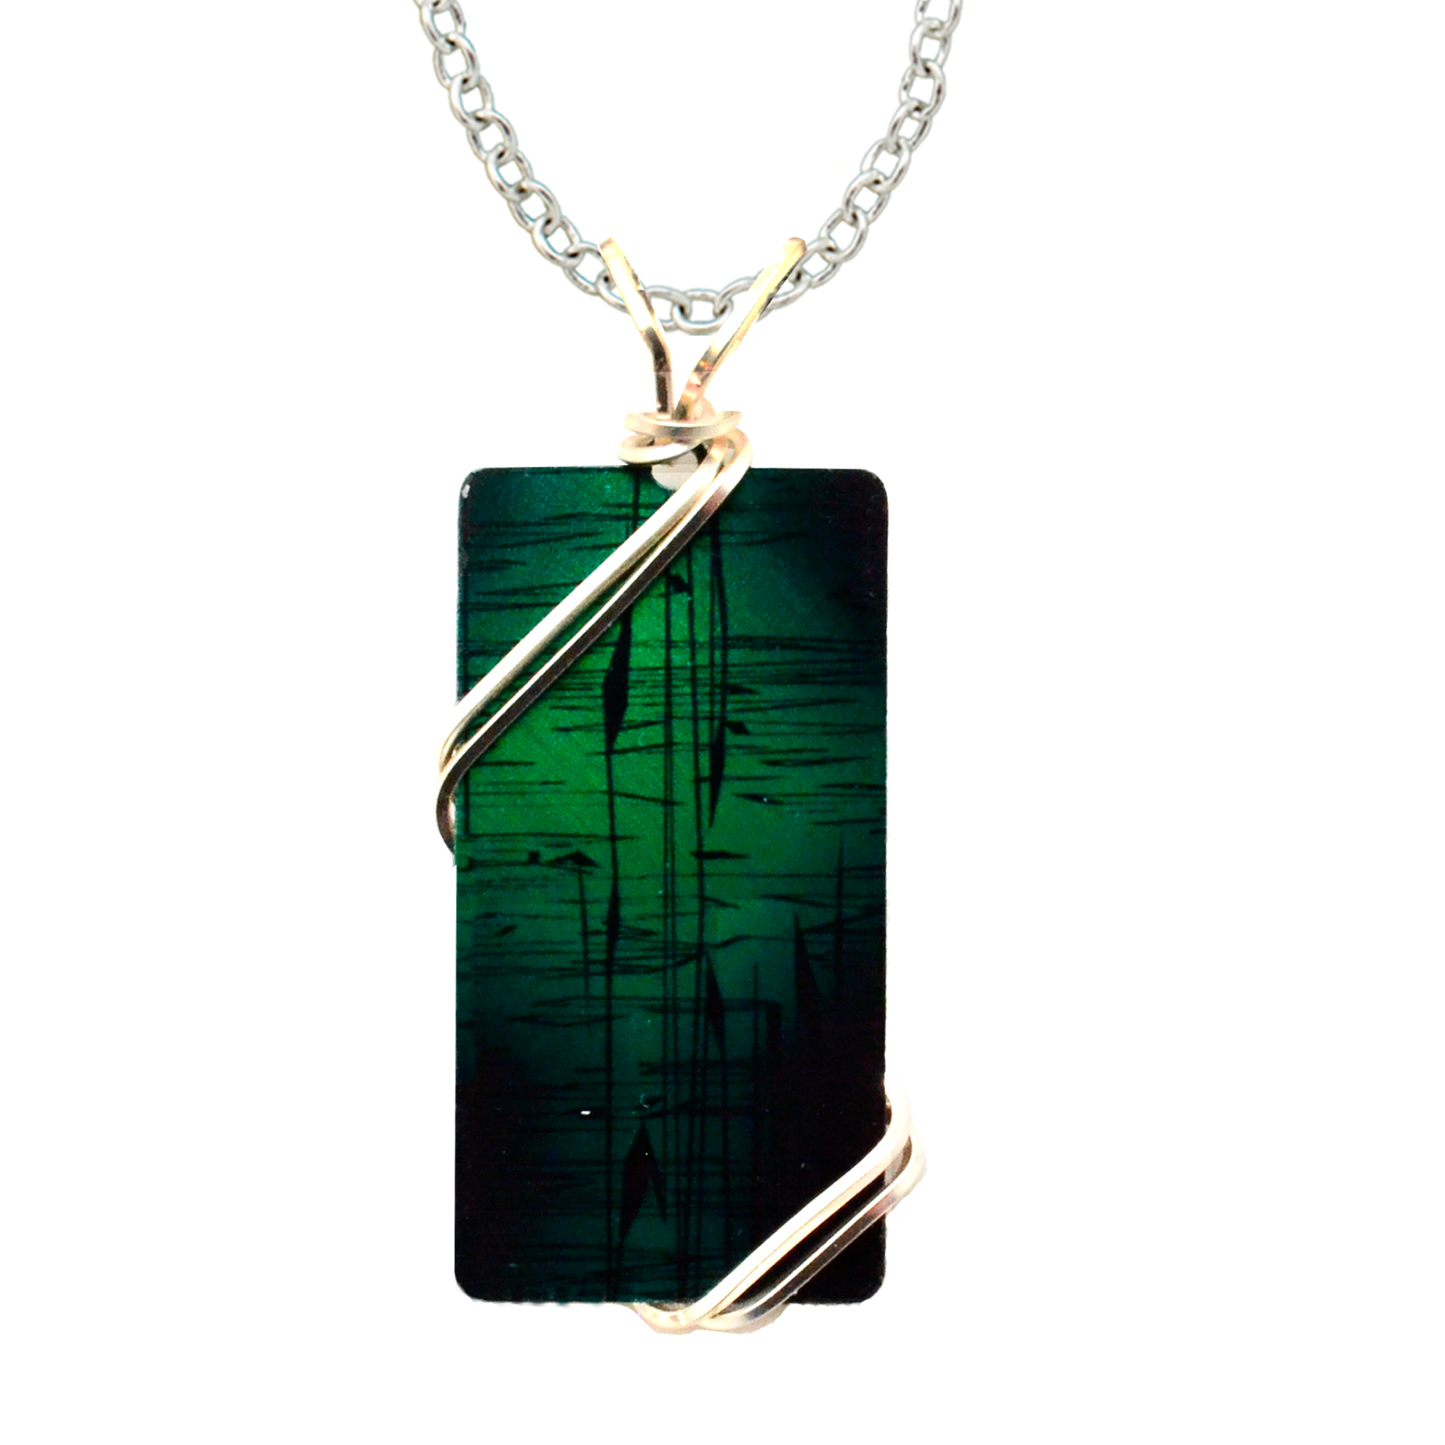 Cattails Necklace, 1.5" pendant with silver-plated wiring, Item# 4729X